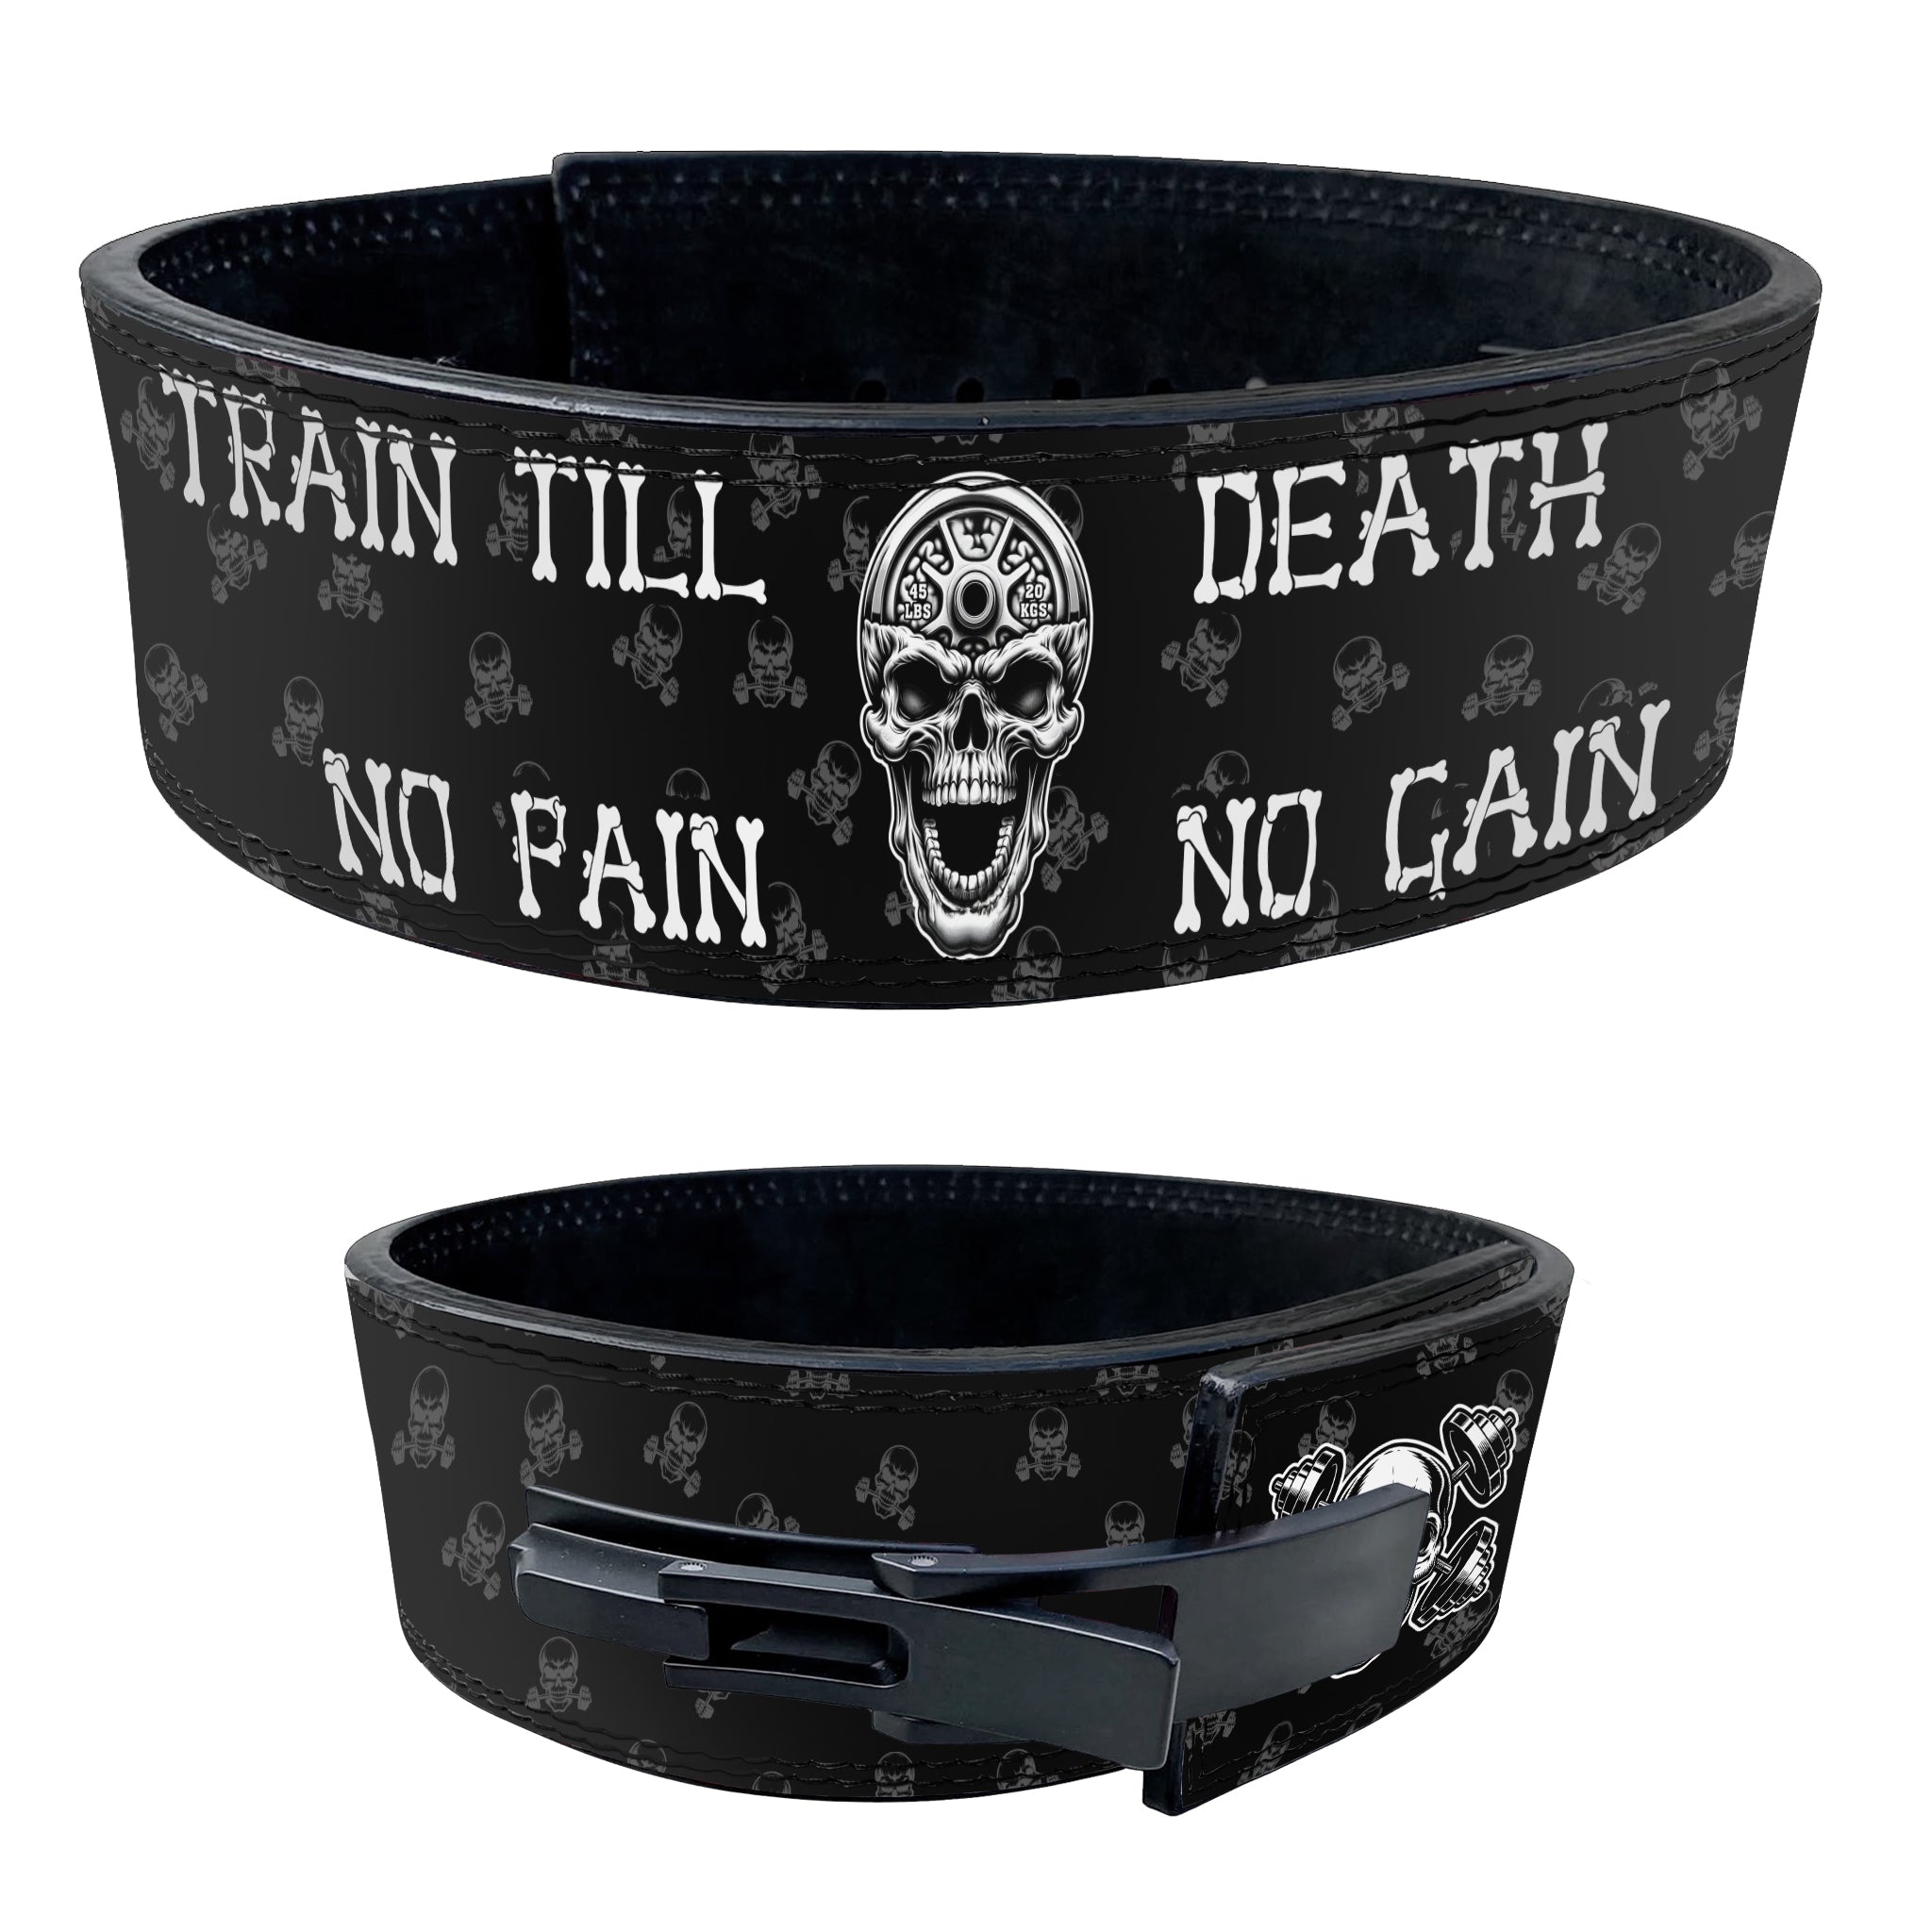 Personalized Skull Weight Lifting Belt Train Till Death 11331